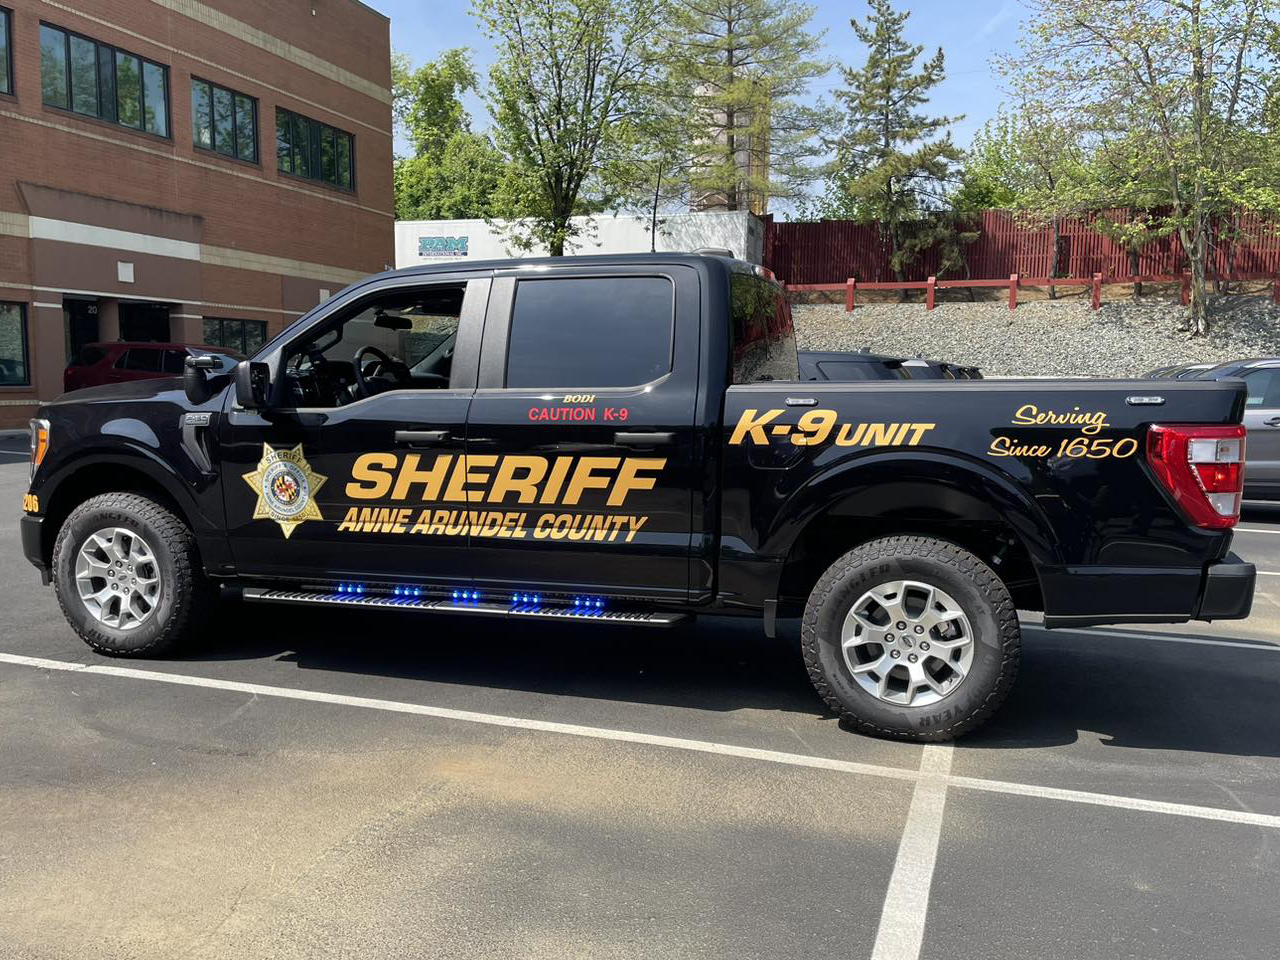 Office of the Sheriff truck in parking lot